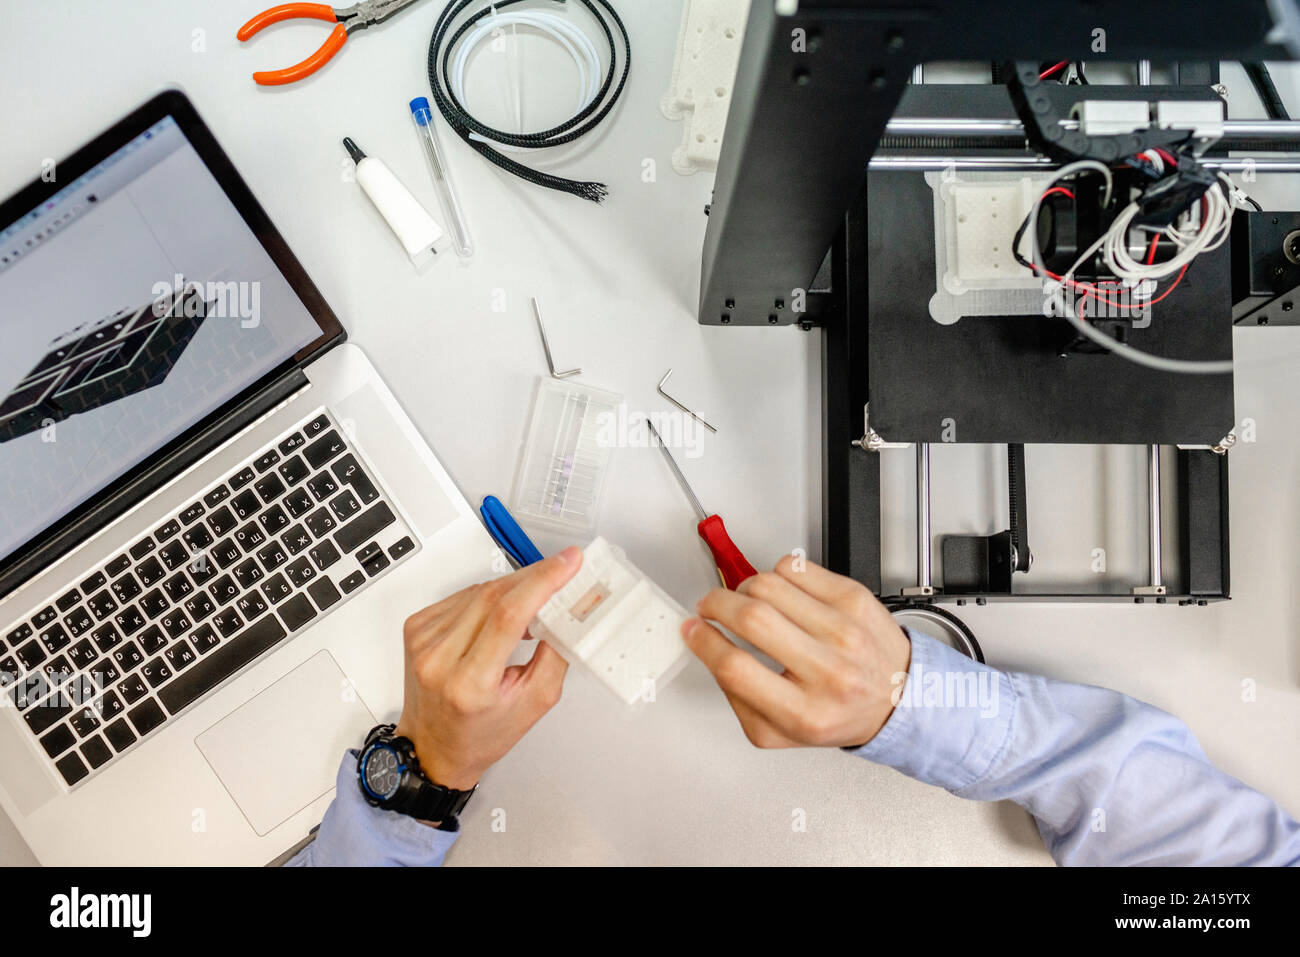 Student setting up 3D printer, overhead view Stock Photo